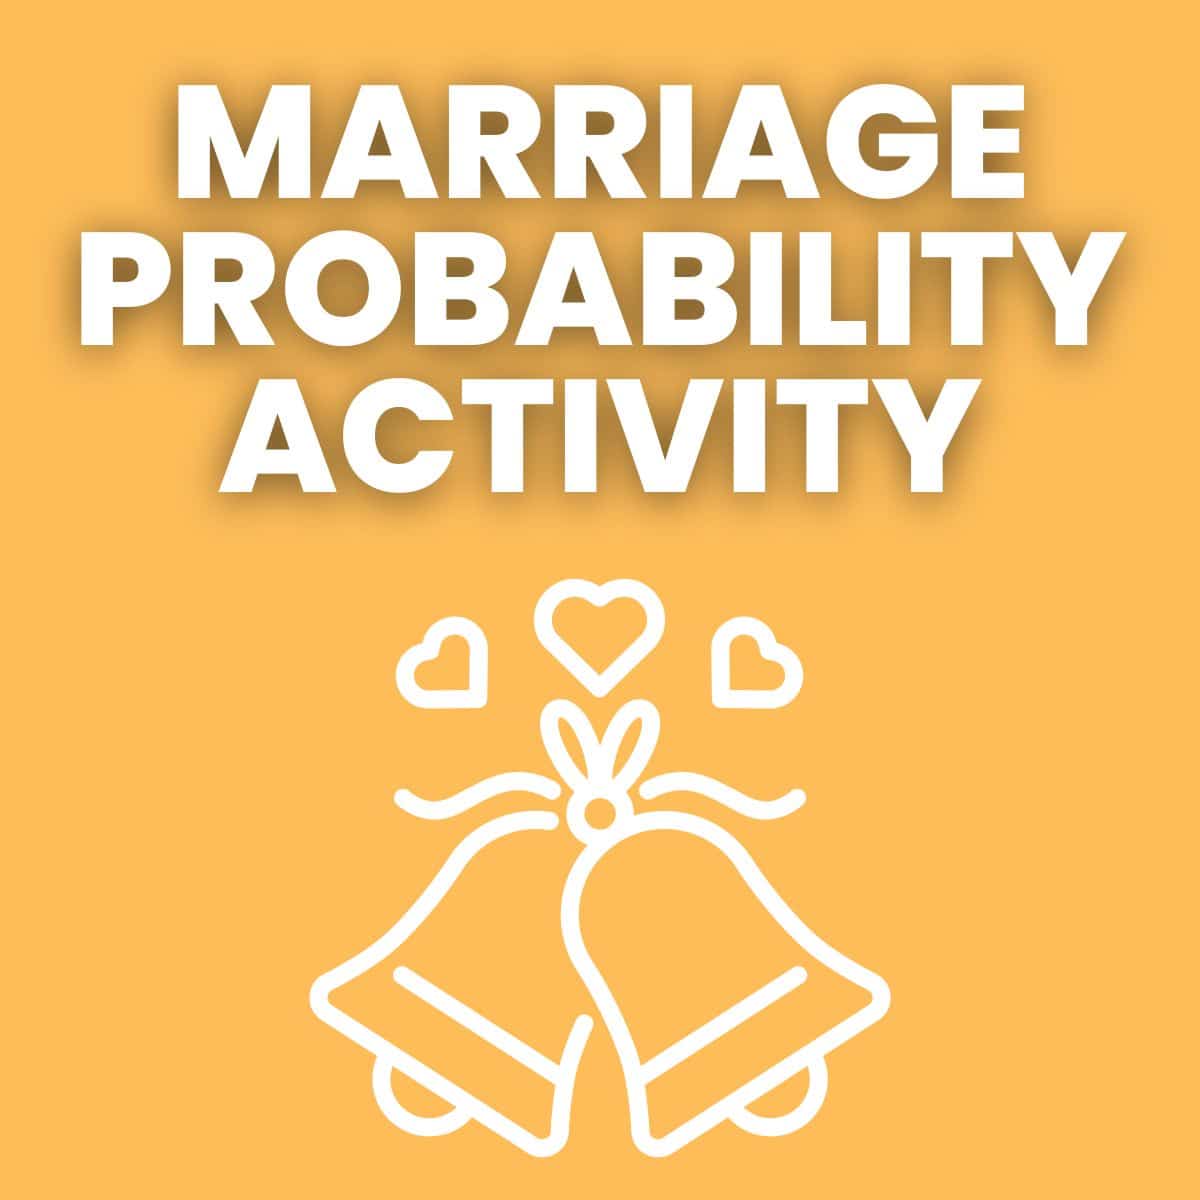 drawing of wedding bells with text "marriage probability activity"